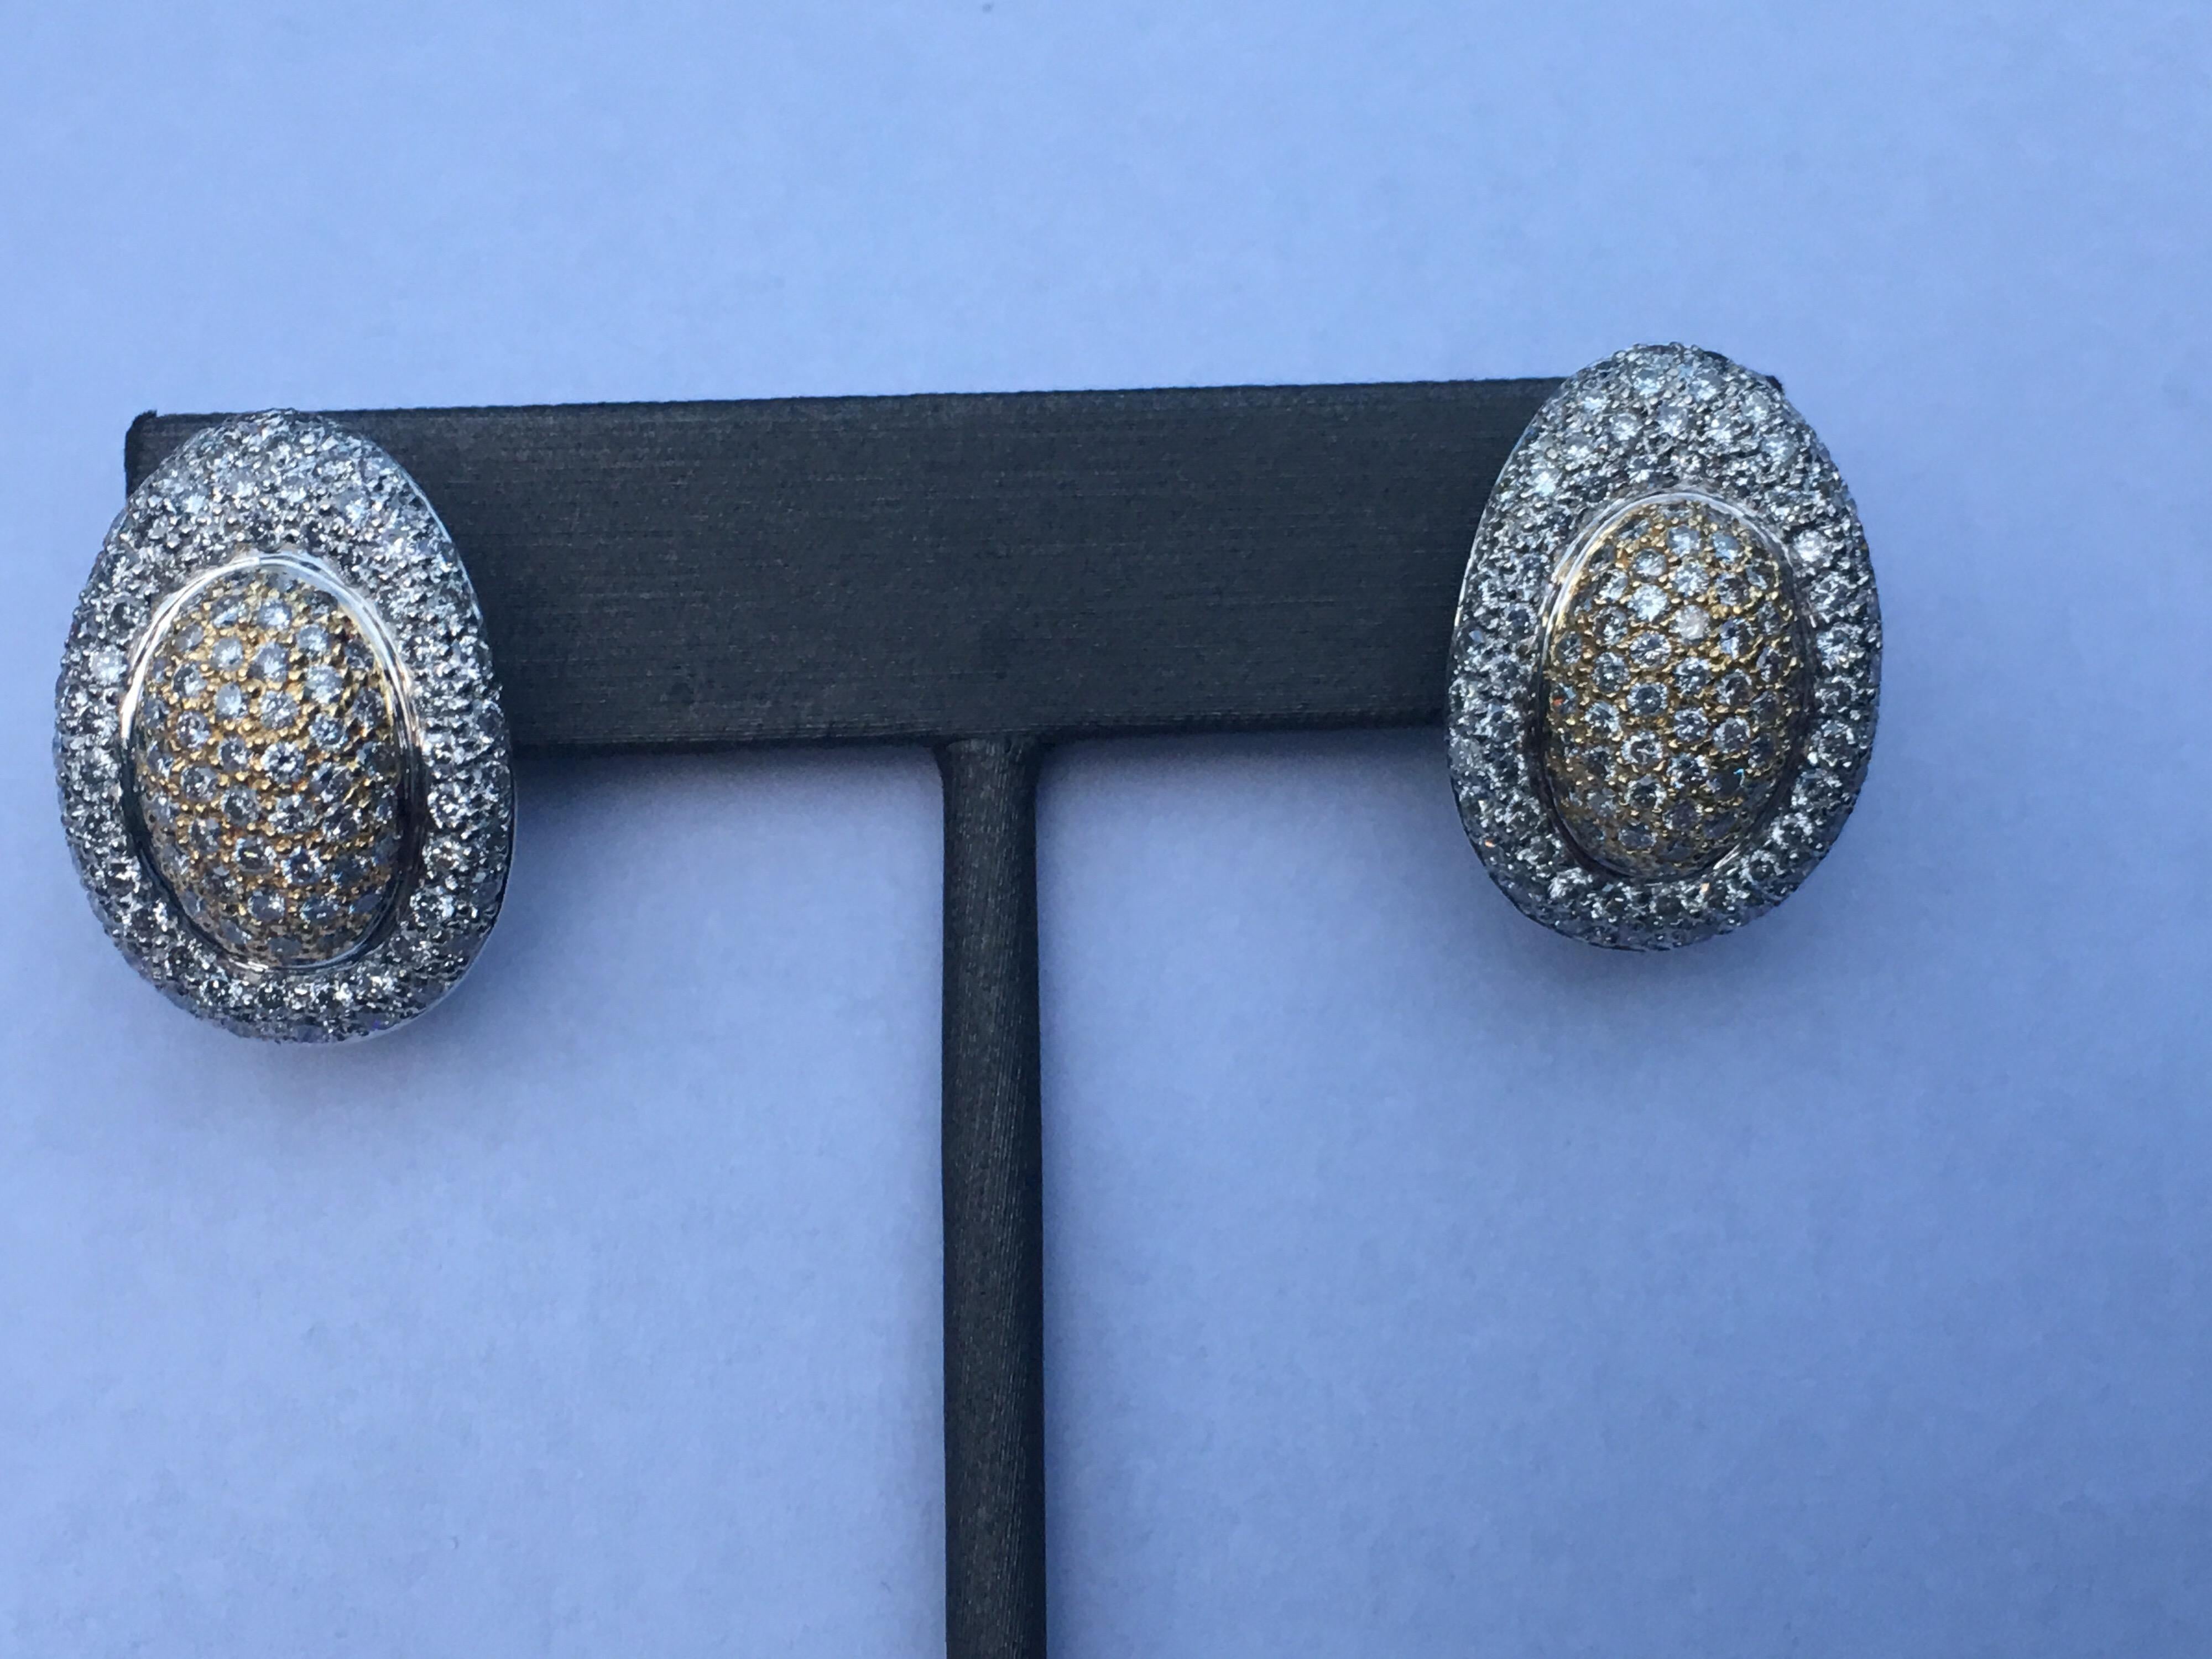 Diamond earring set in 18K Two Tone Gold. Total Diamond weight is 3.17 Carat. This is one of a kind earring and hand crafted.
